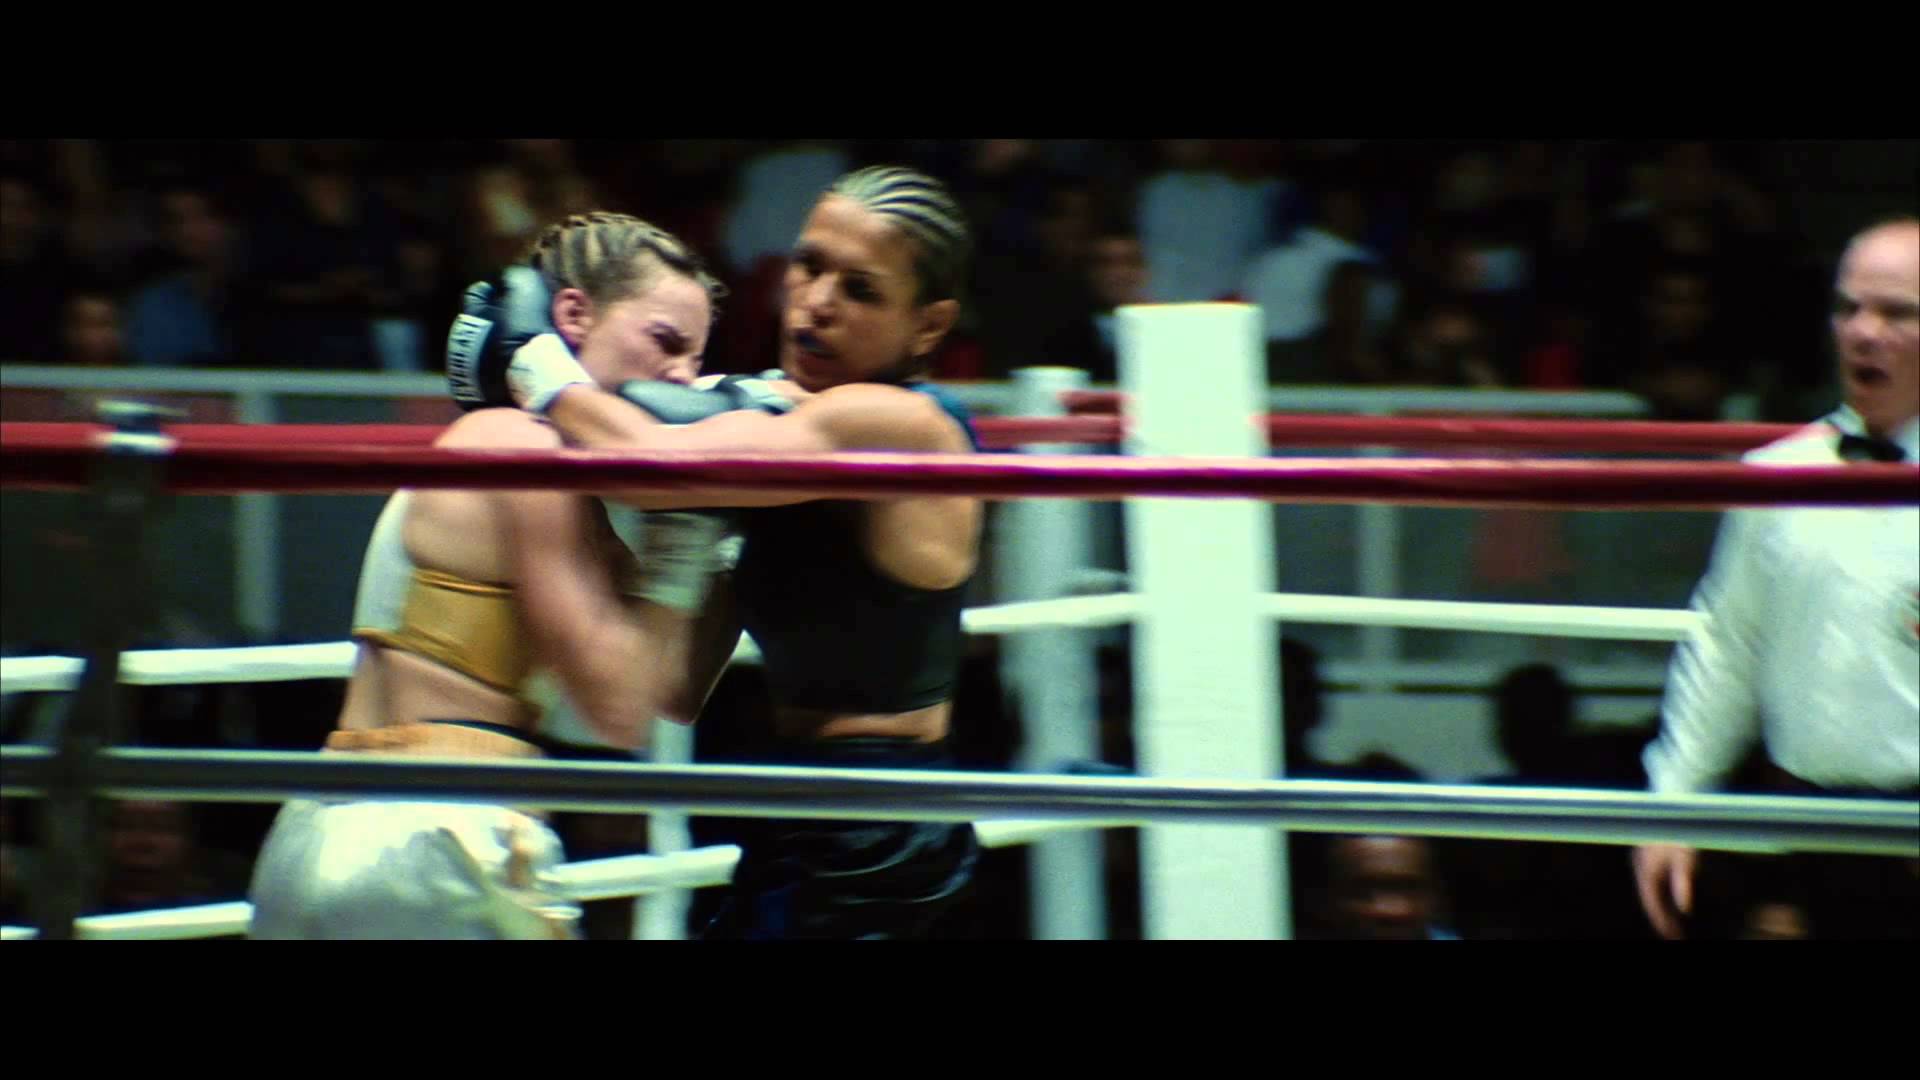 HQ Million Dollar Baby Wallpapers | File 106.41Kb